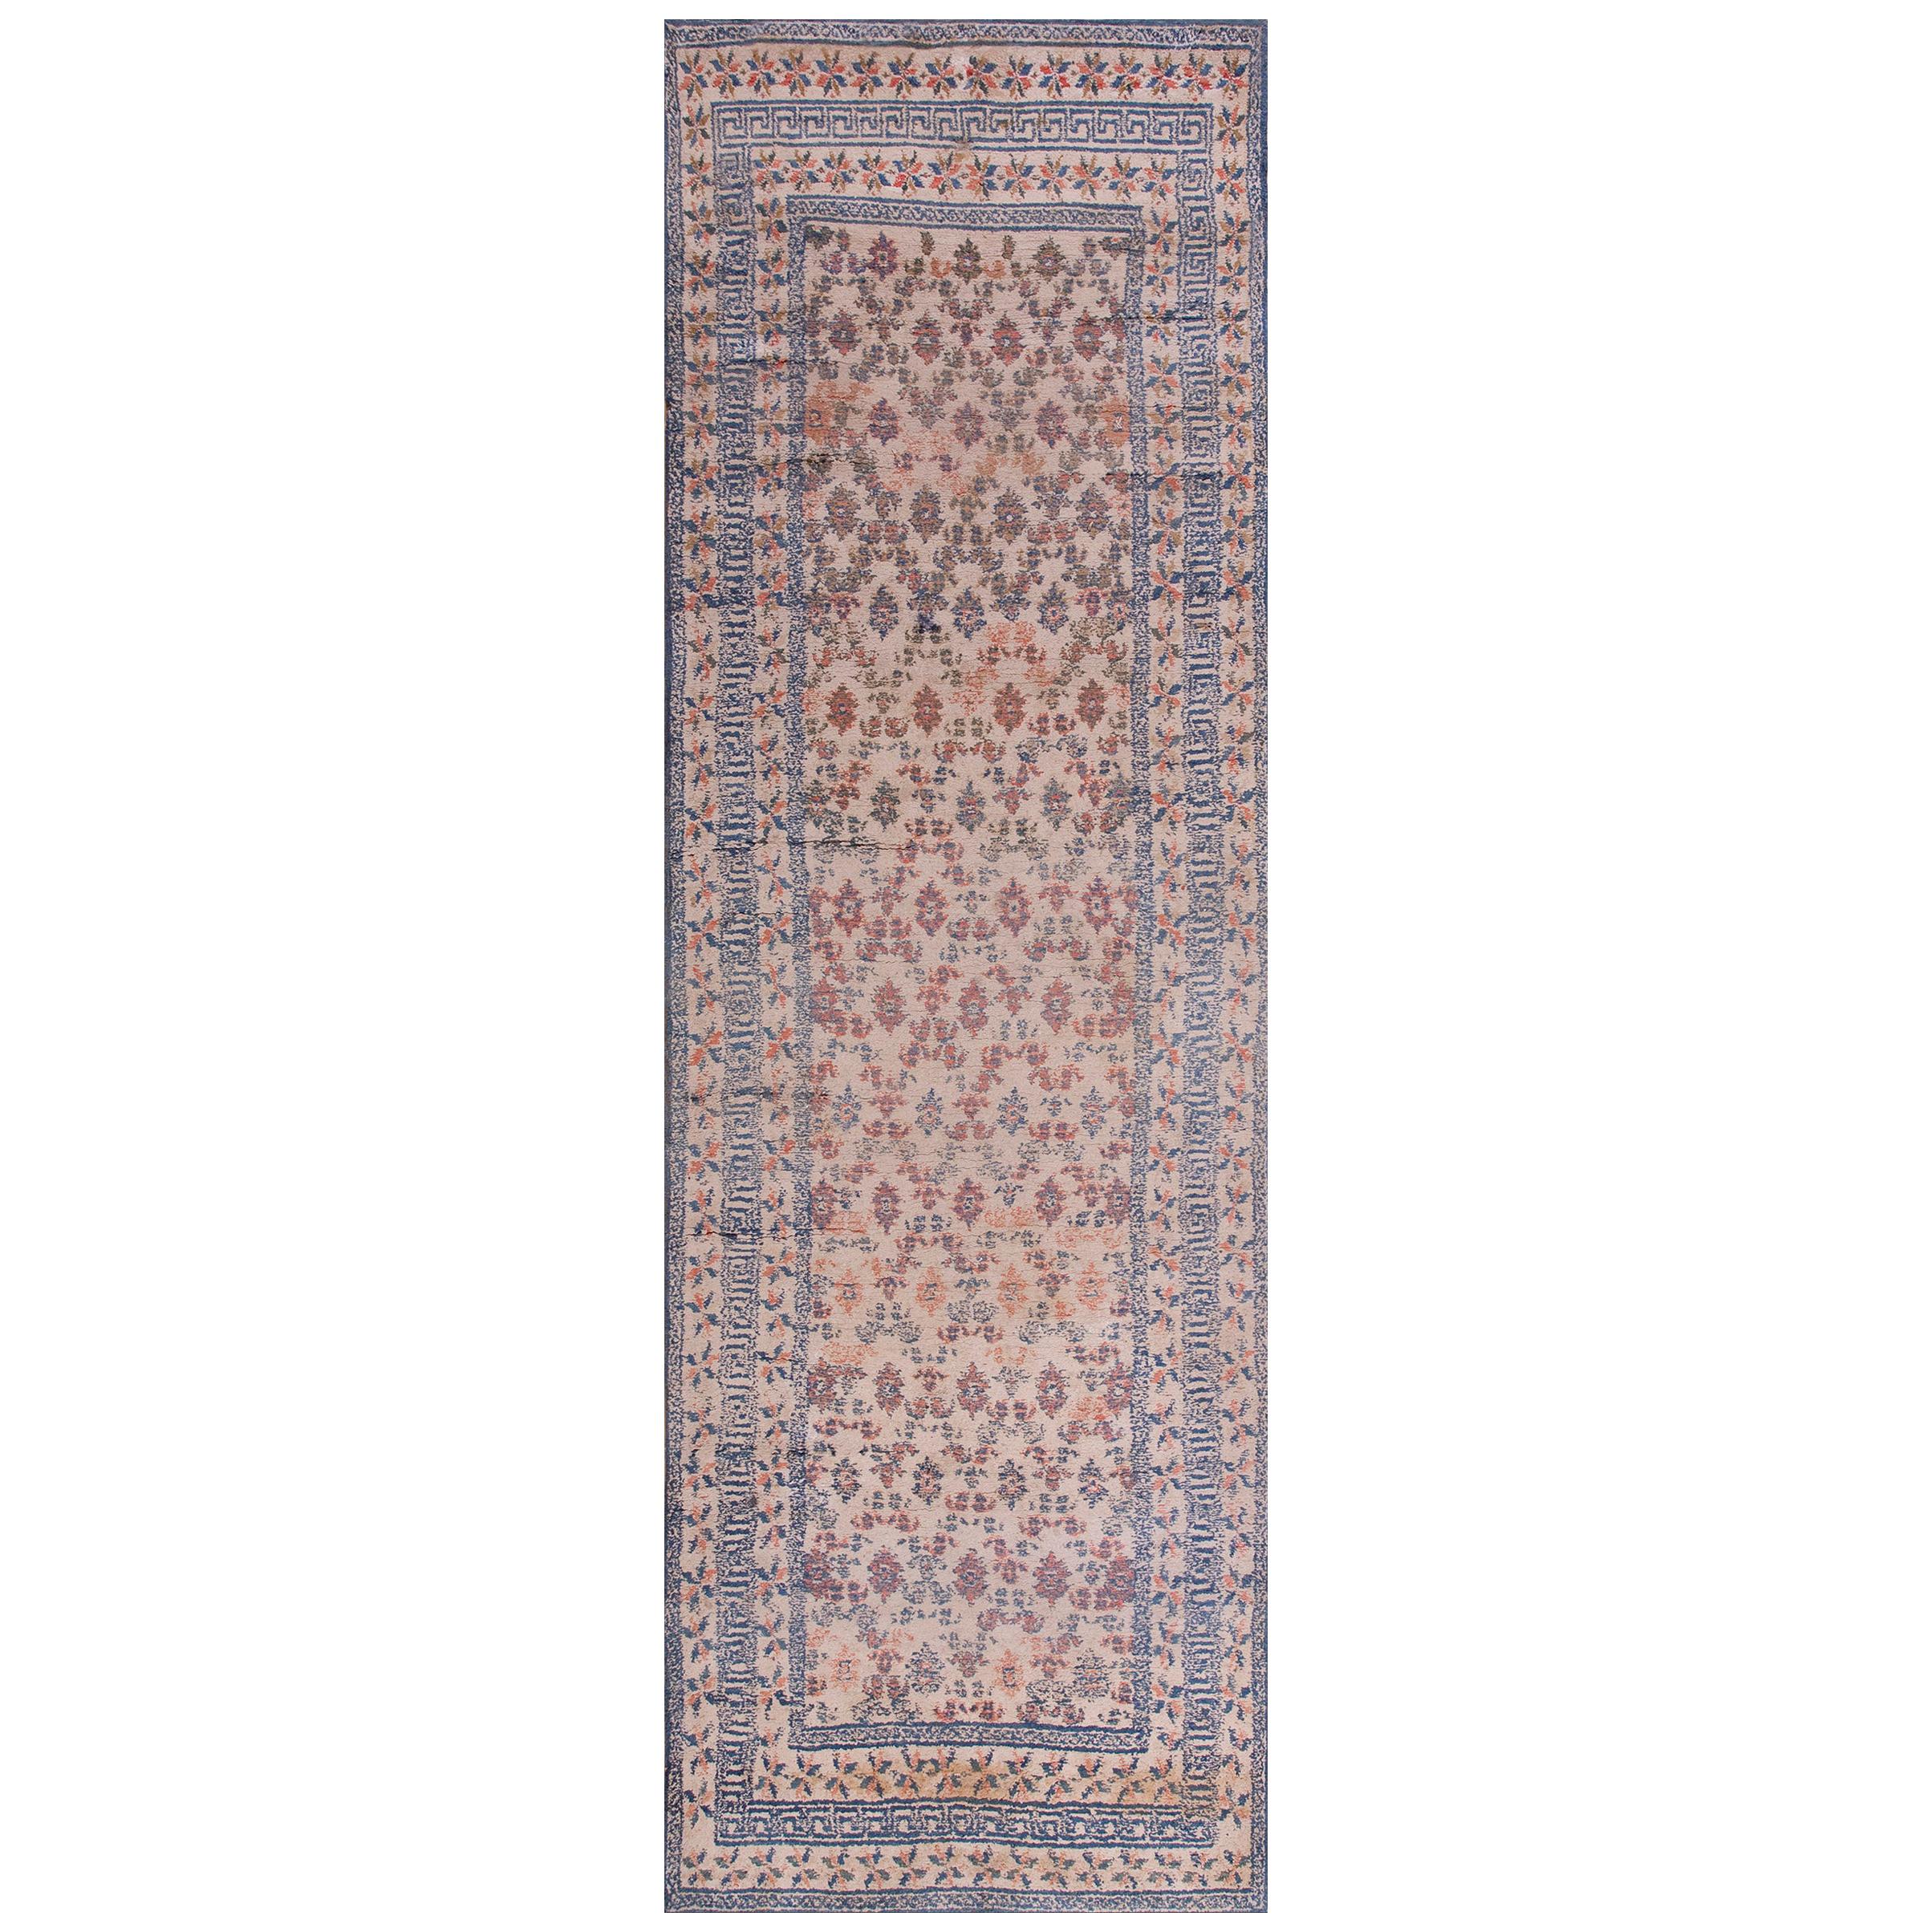  Antique Indian Agra Cotton Rug For Sale